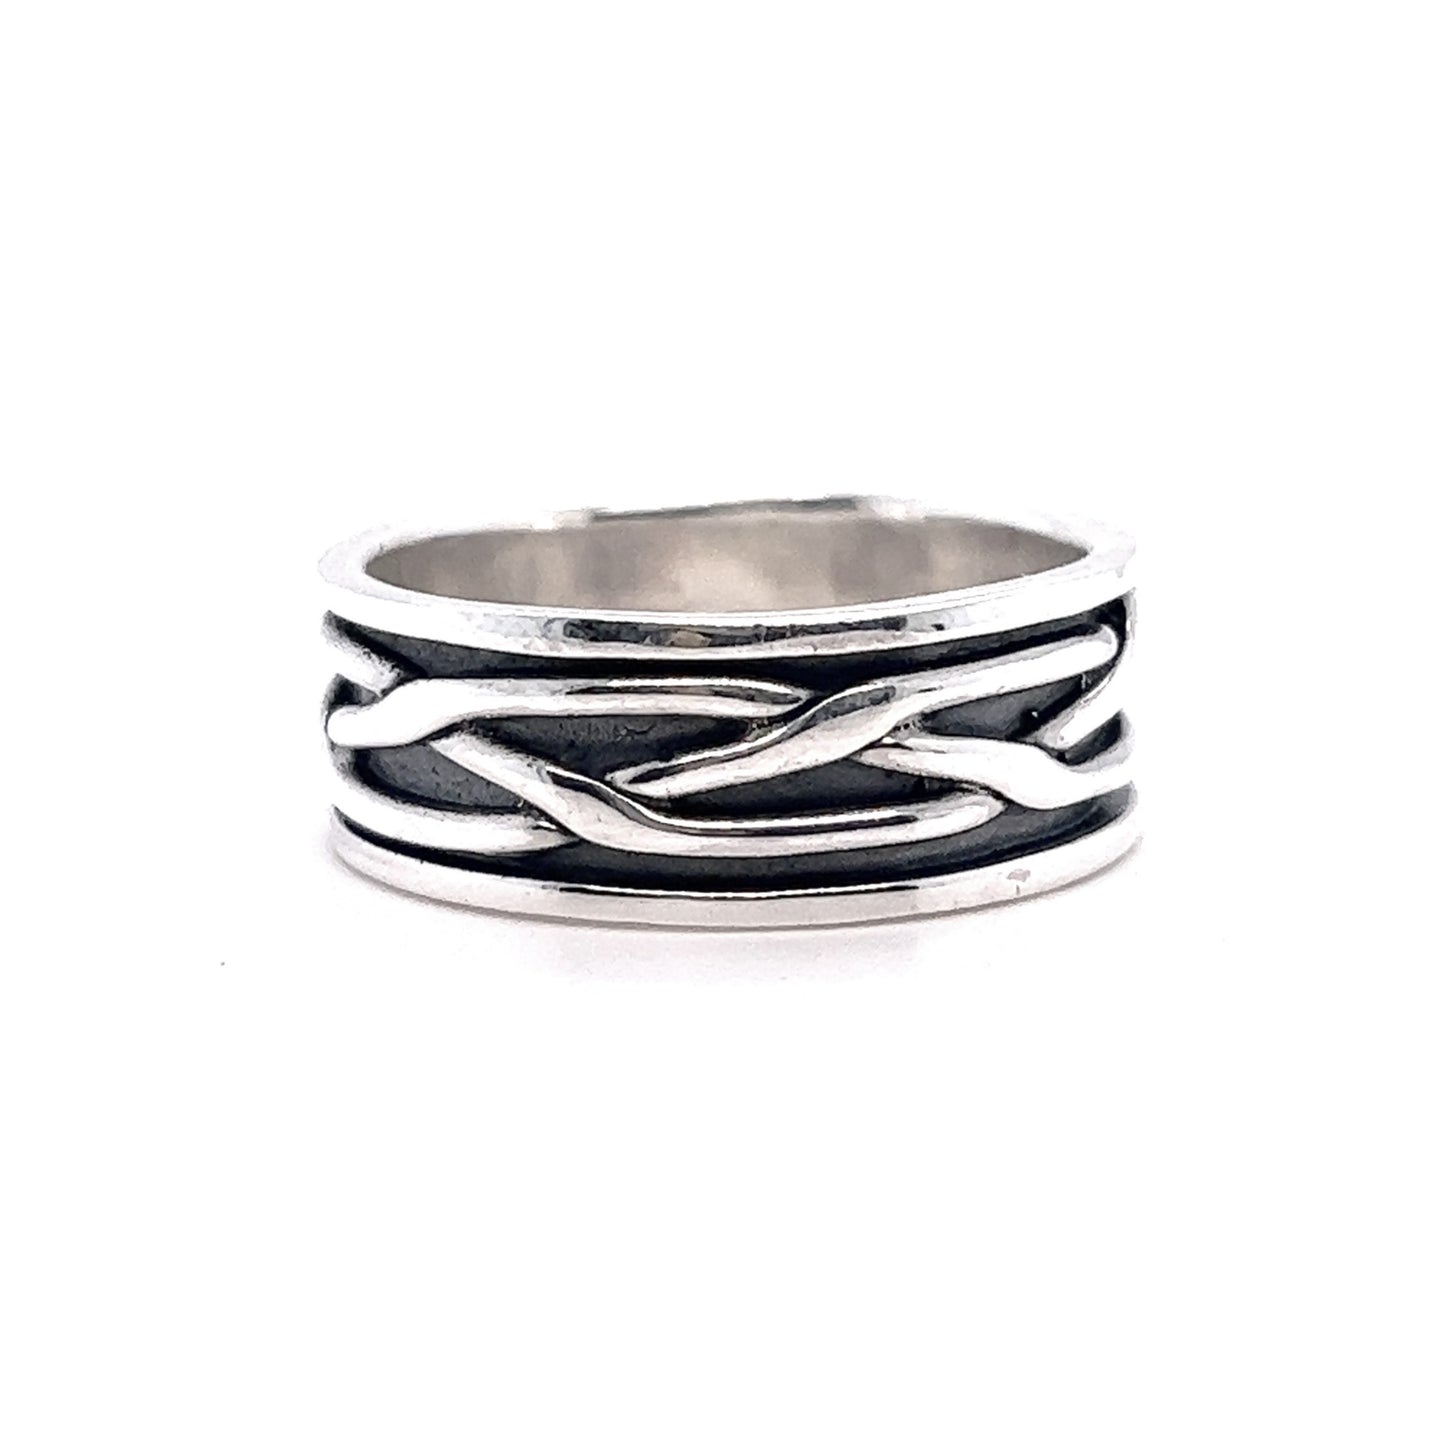 A Thick Woven Band with black and white designs.